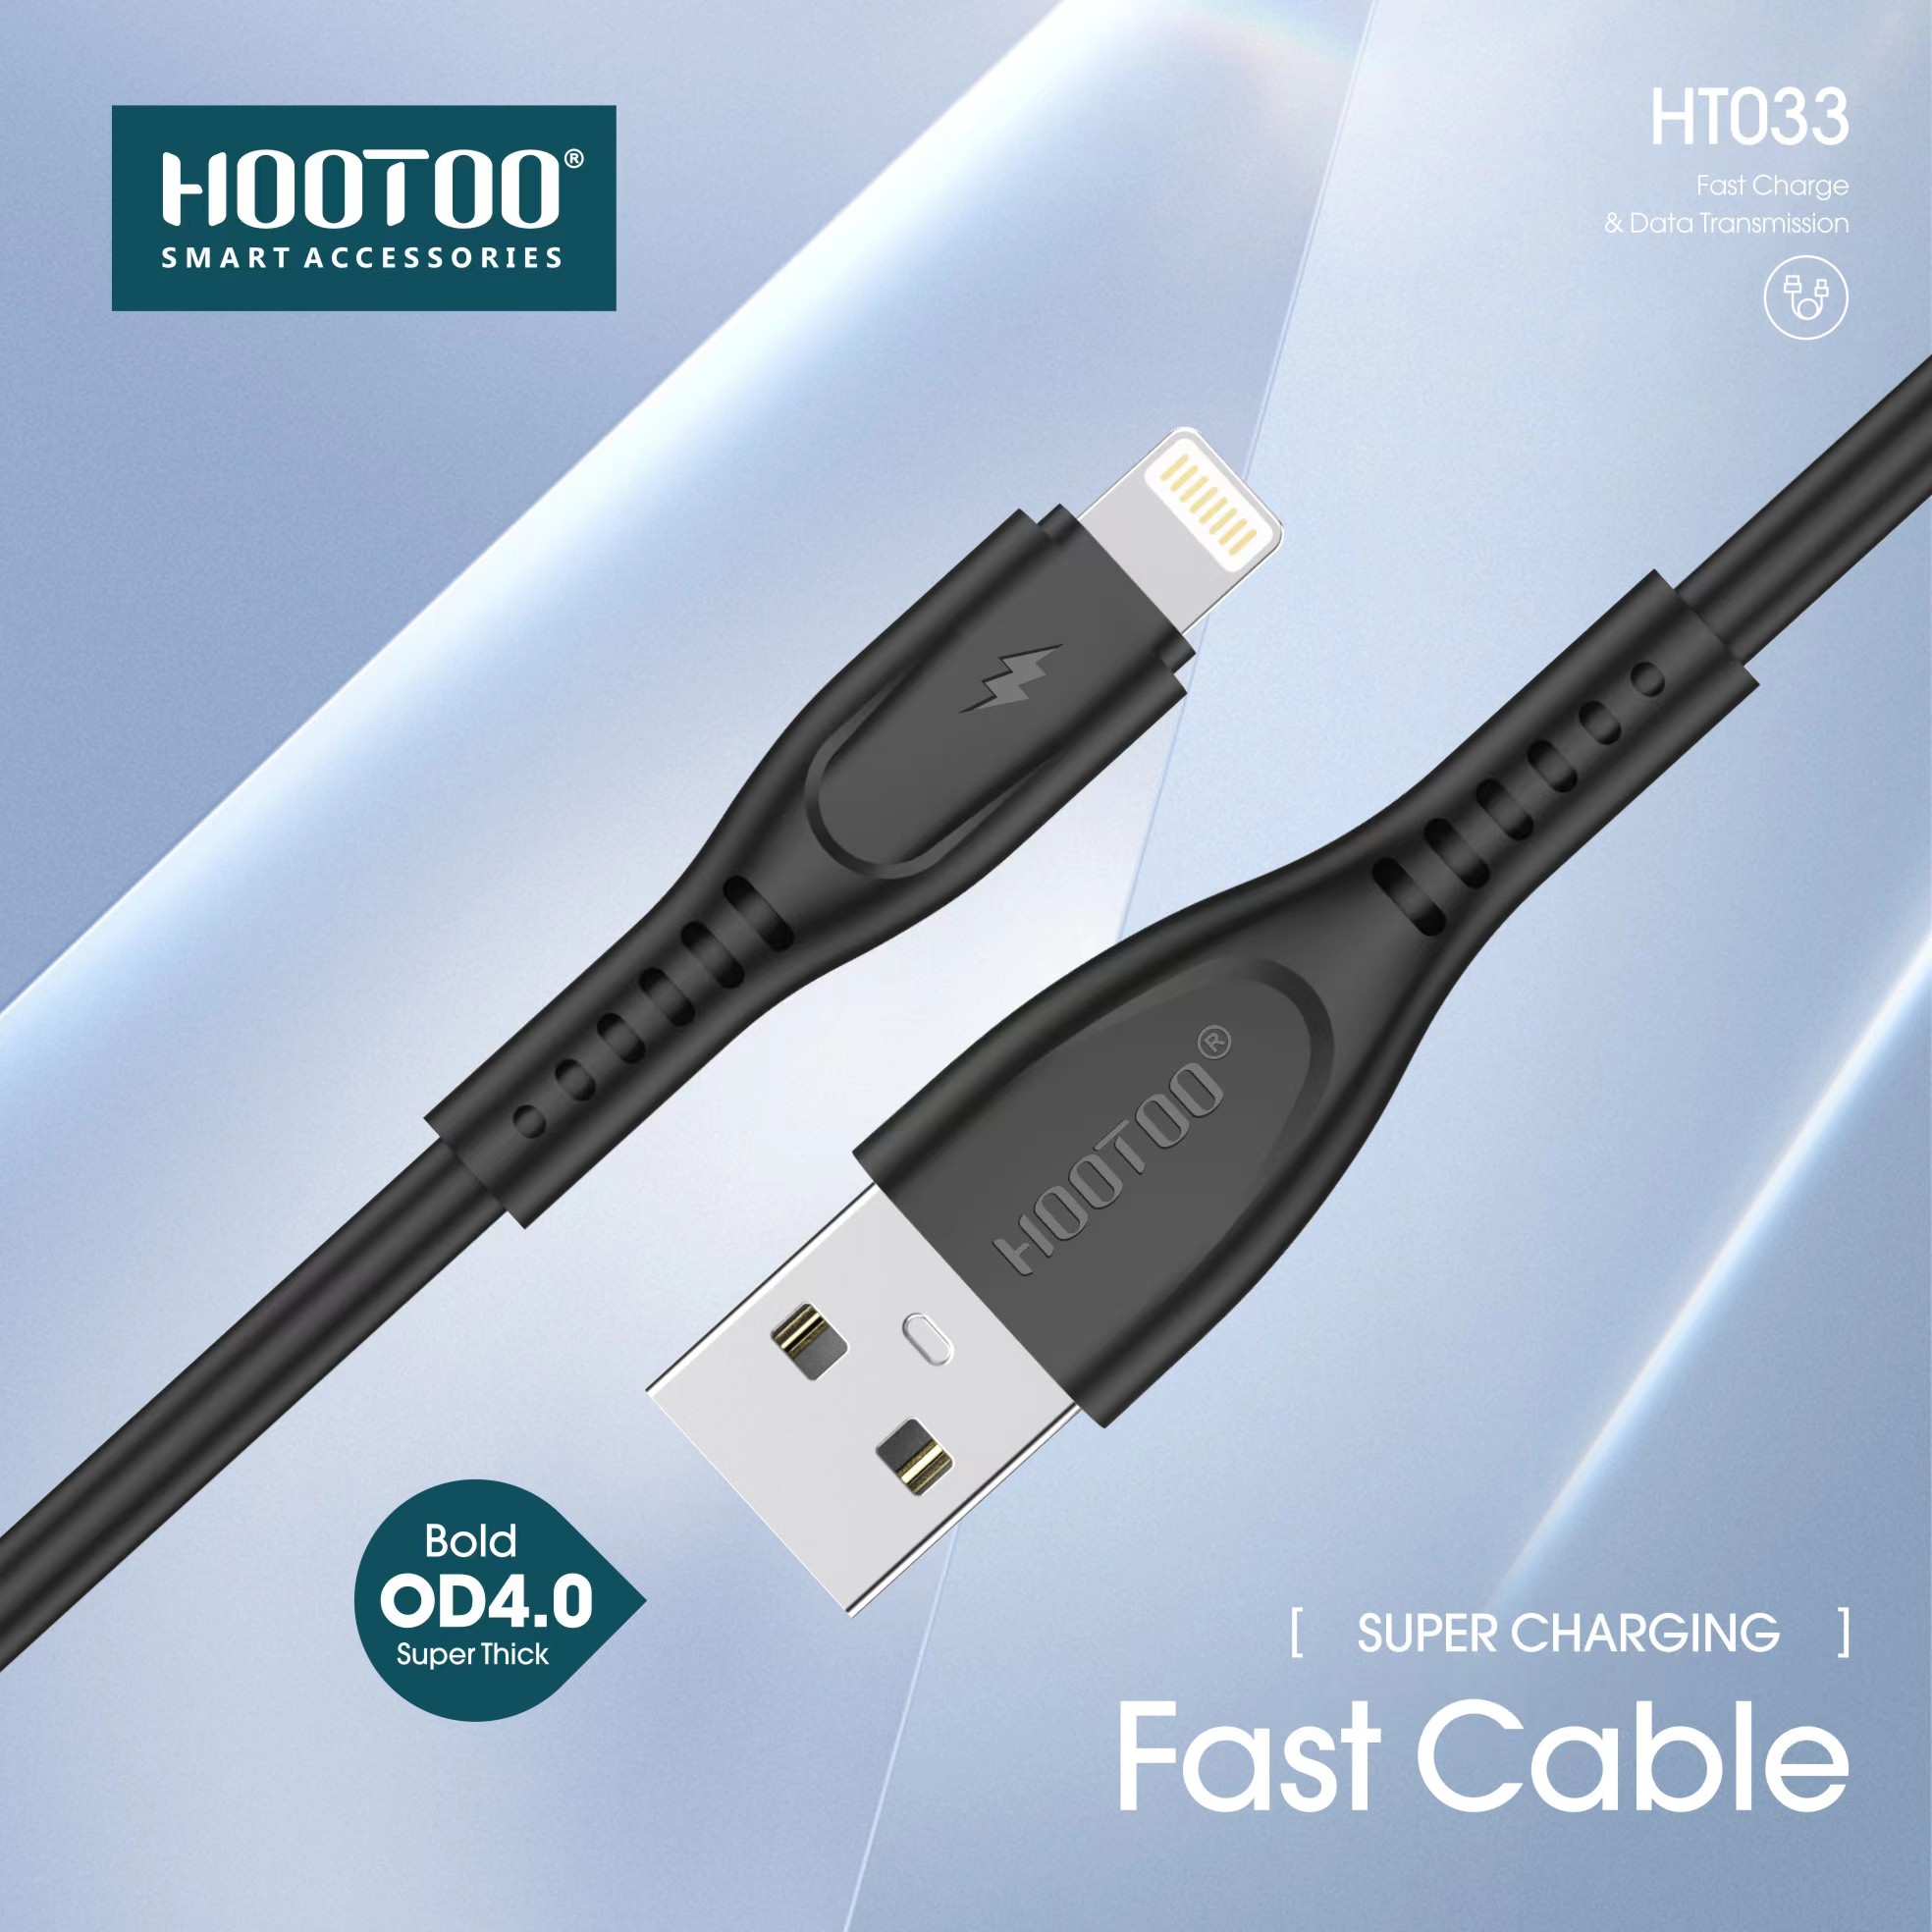 CABLE HT-033